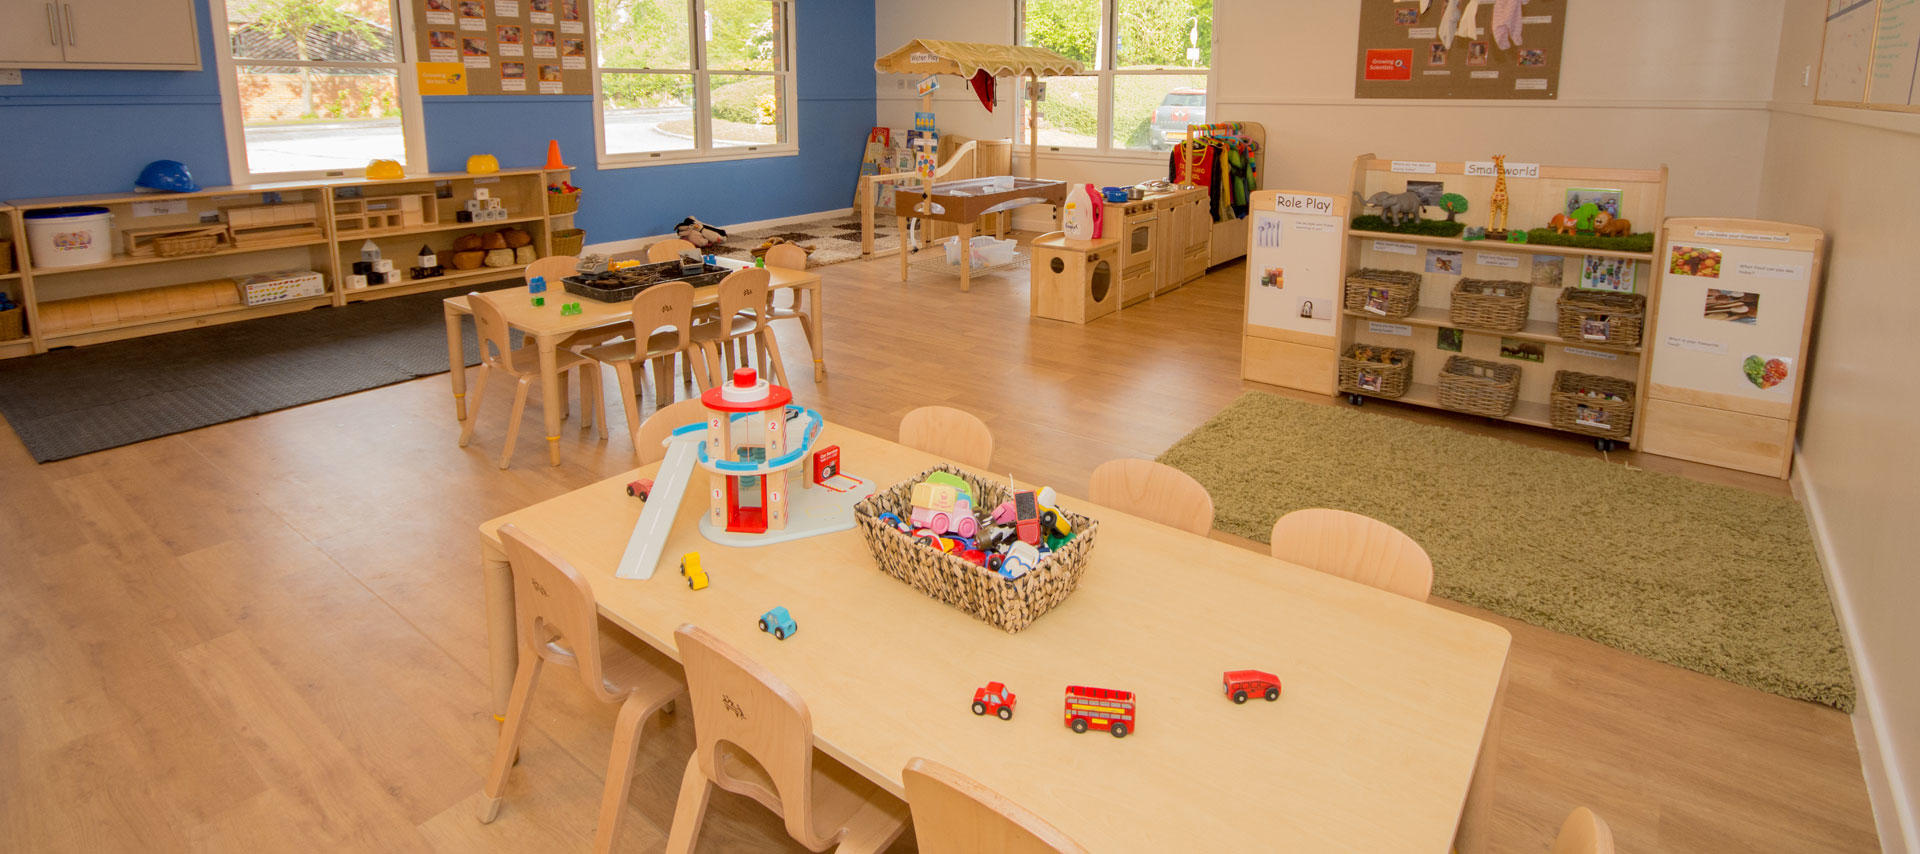 Images Bright Horizons Callands Day Nursery and Preschool